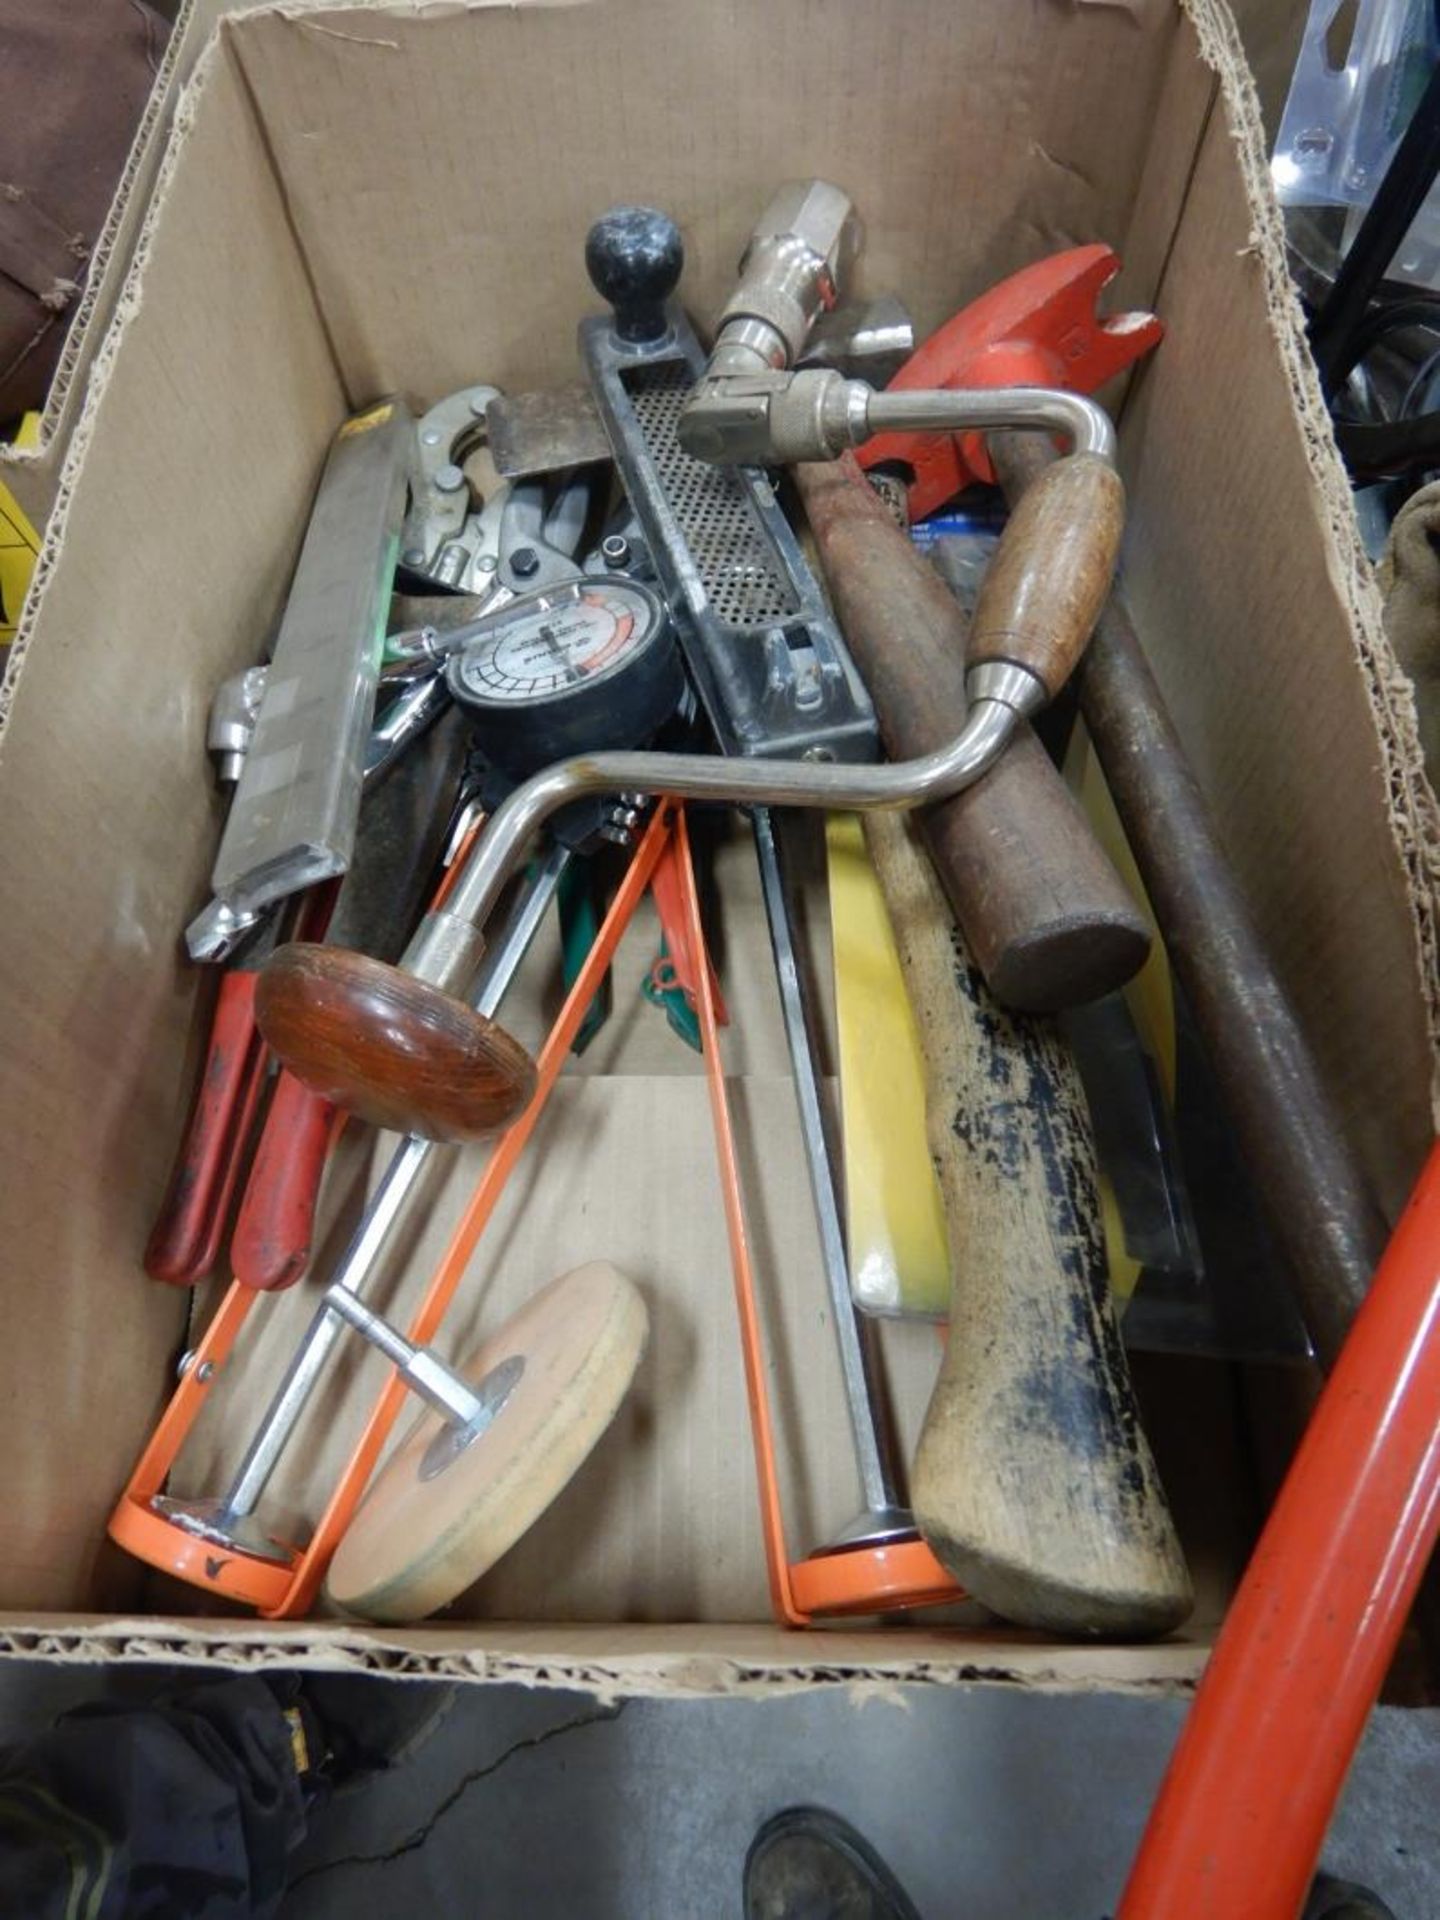 BOLT CUTTERS, CONDUIT BENDER, LINO ROLLER, SIDE CUTTERS, ASSORTED HAND TOOLS, ETC - Image 2 of 2